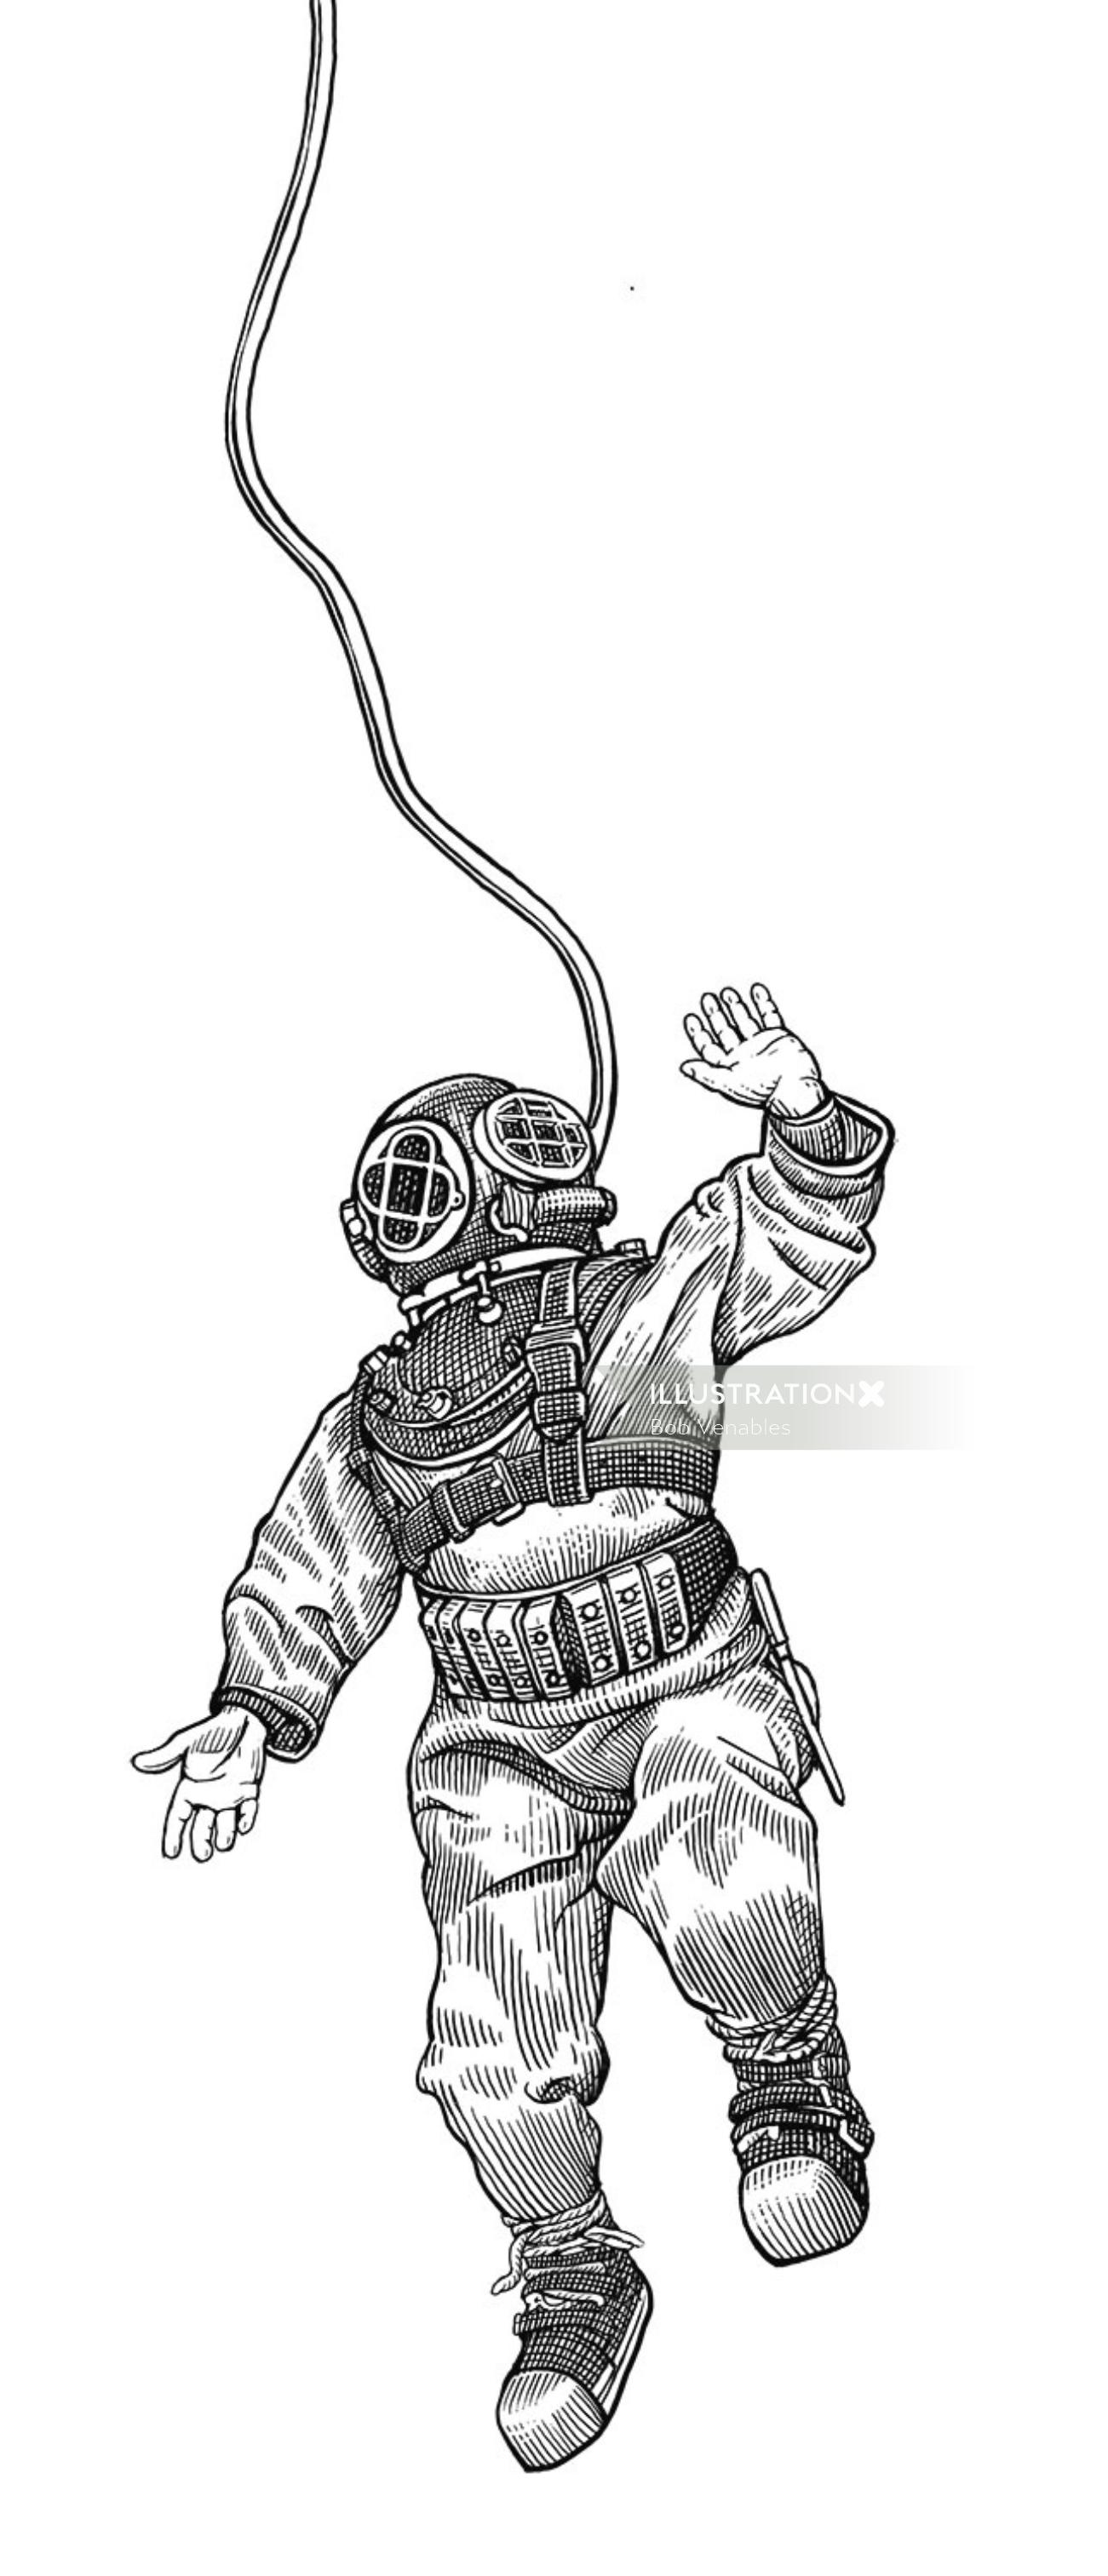 Black and white illustration of astronaut 